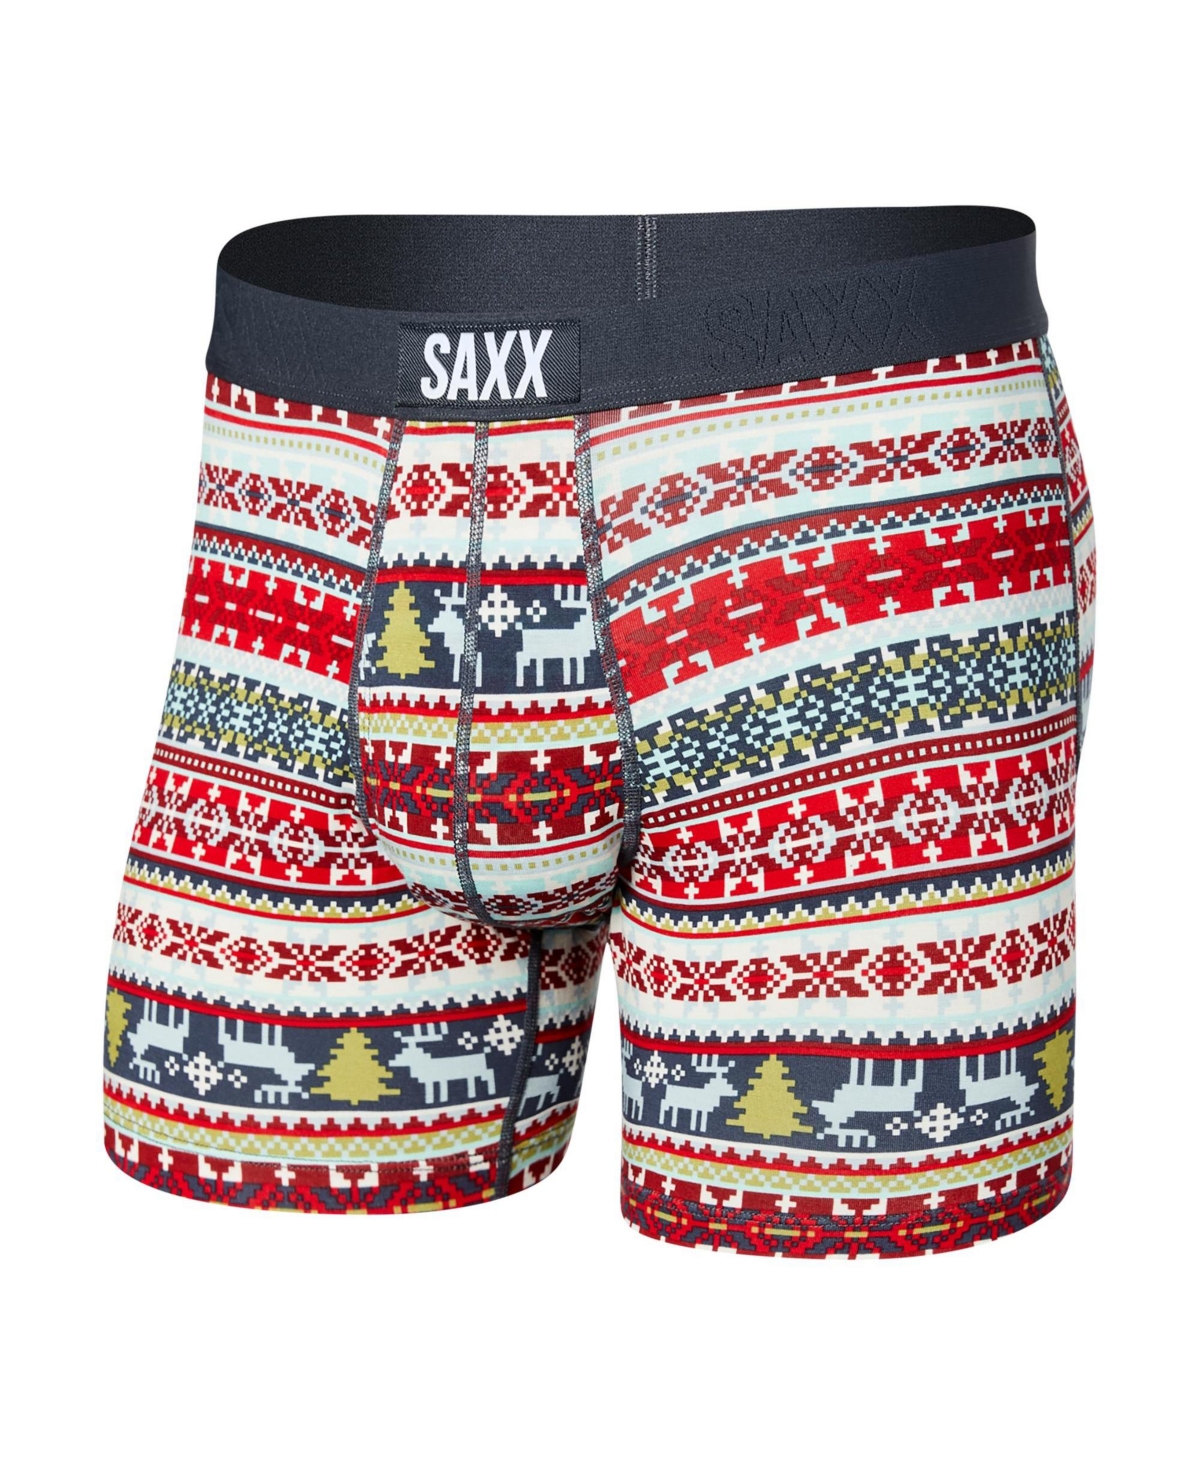 SAXX MEN'S ULTRA SUPER SOFT RELAXED FIT BOXER BRIEFS